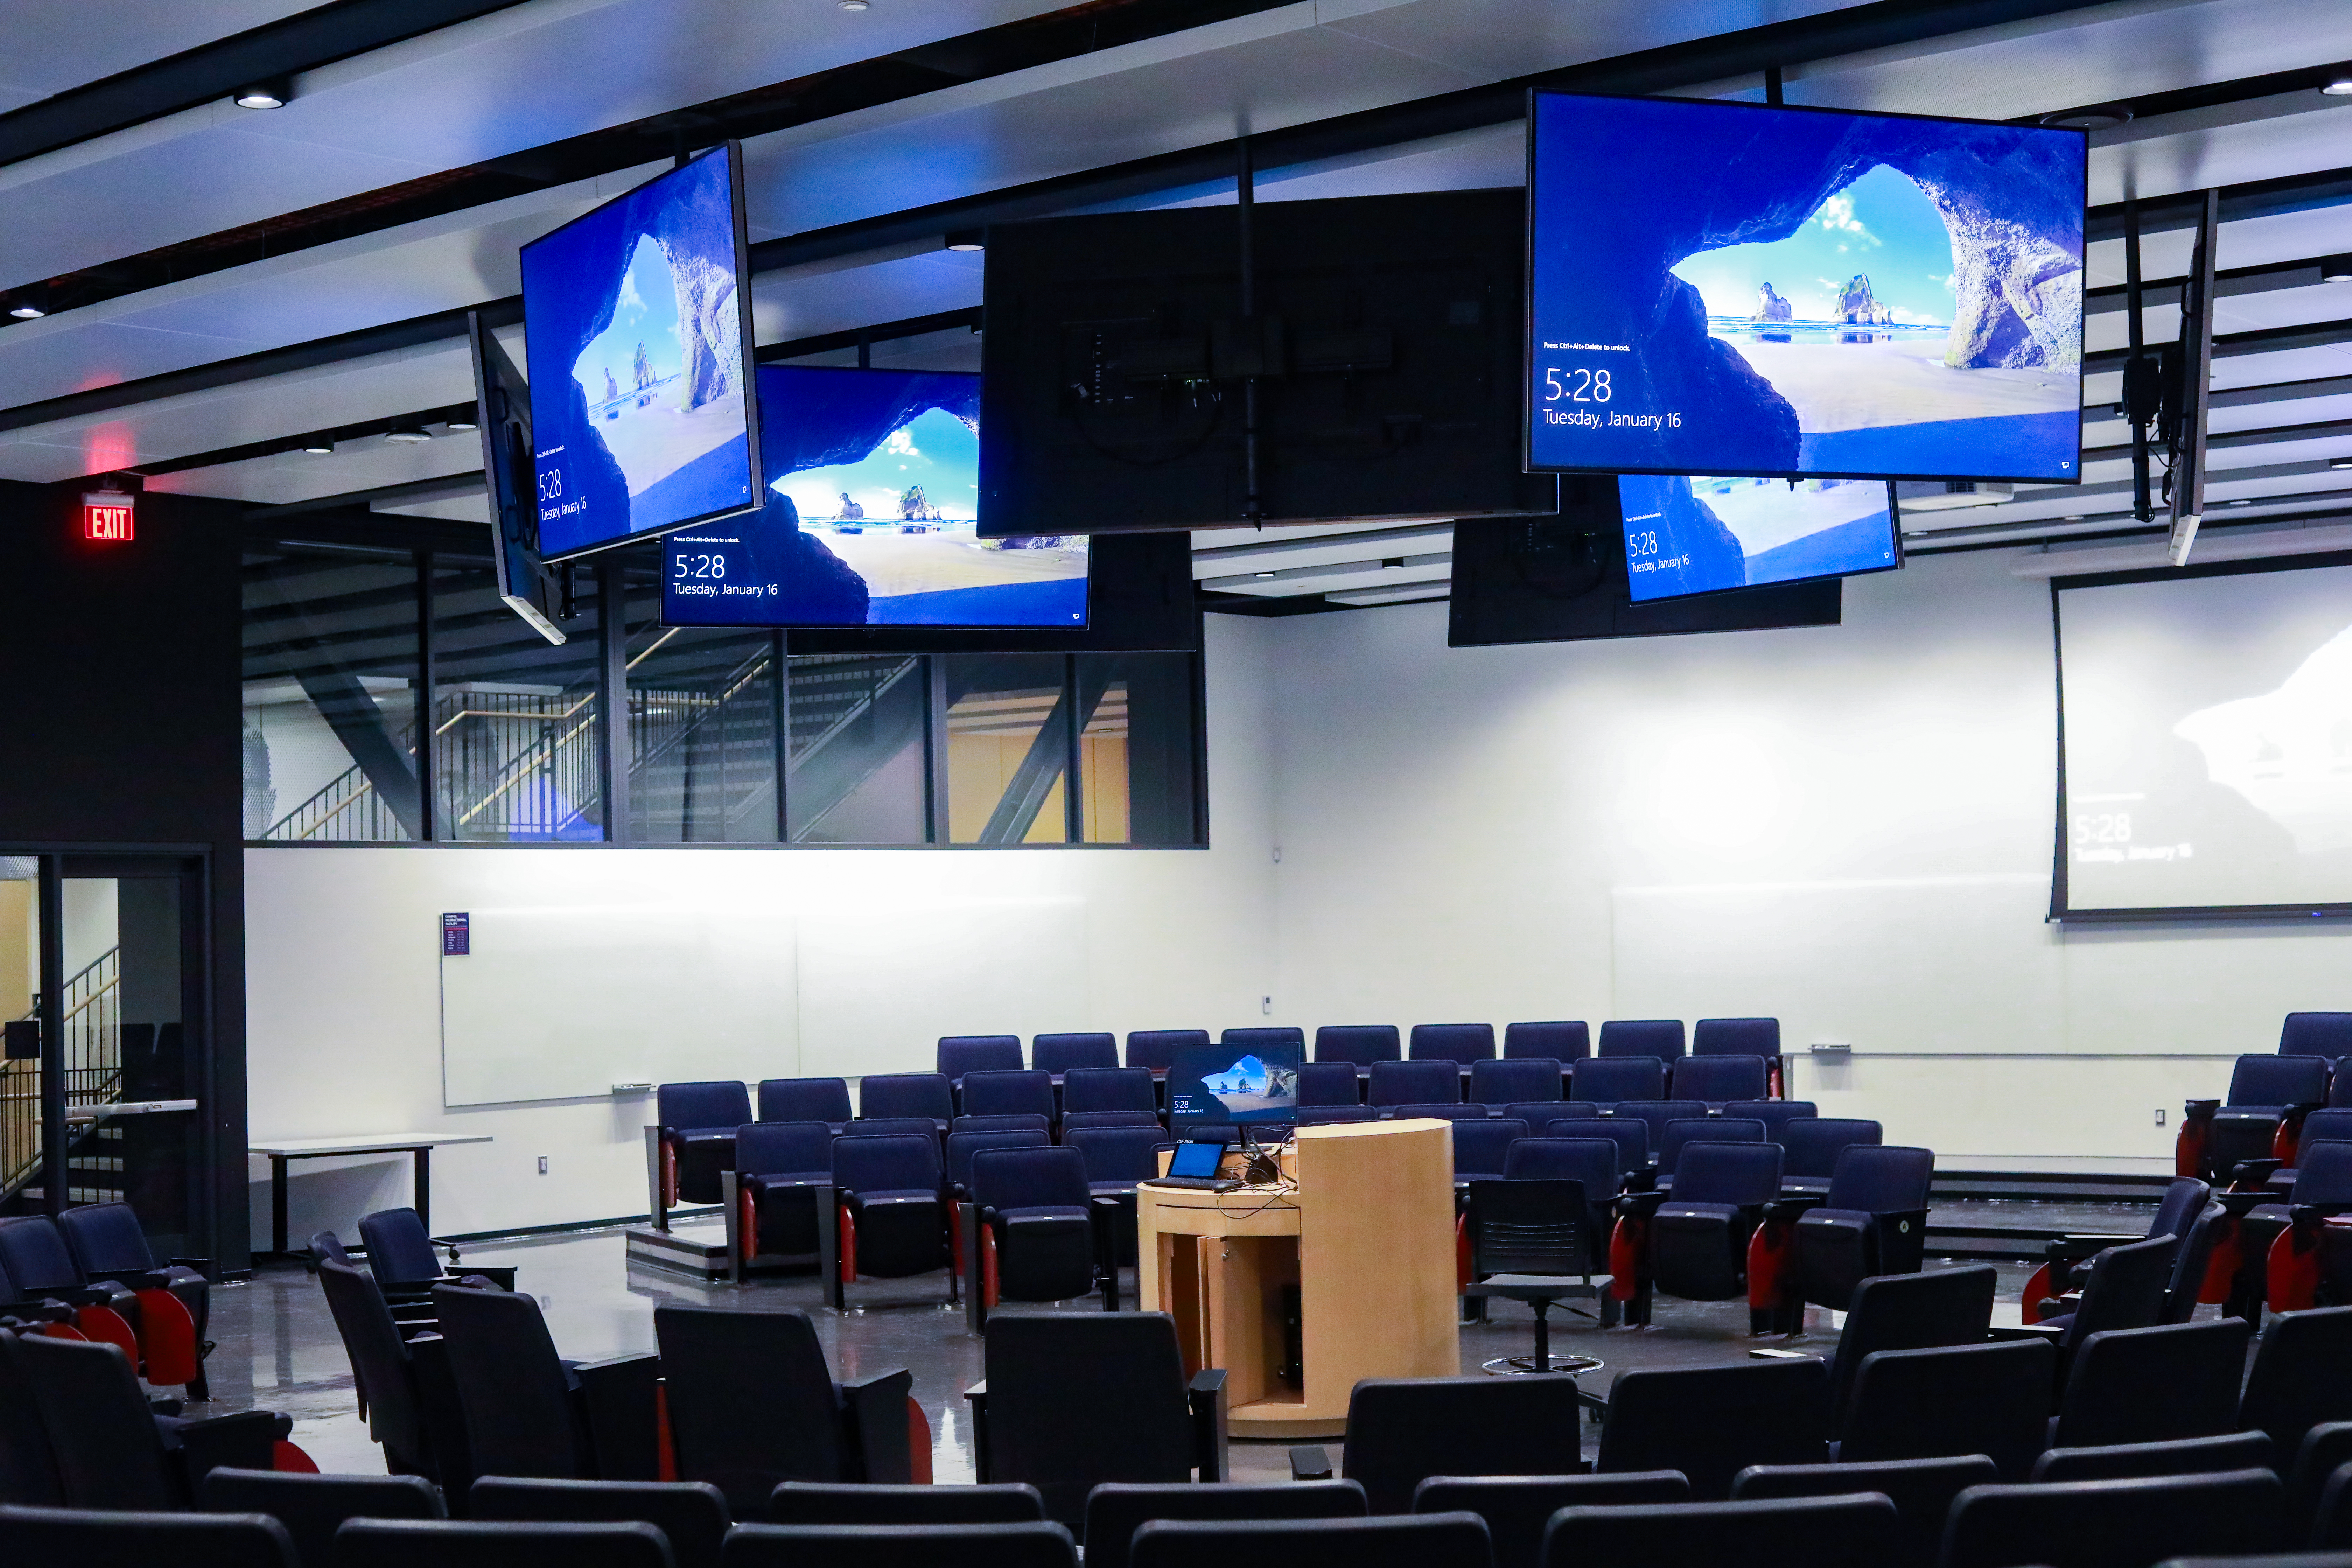 Classroom with seats arranged in a circle and large tv monitors